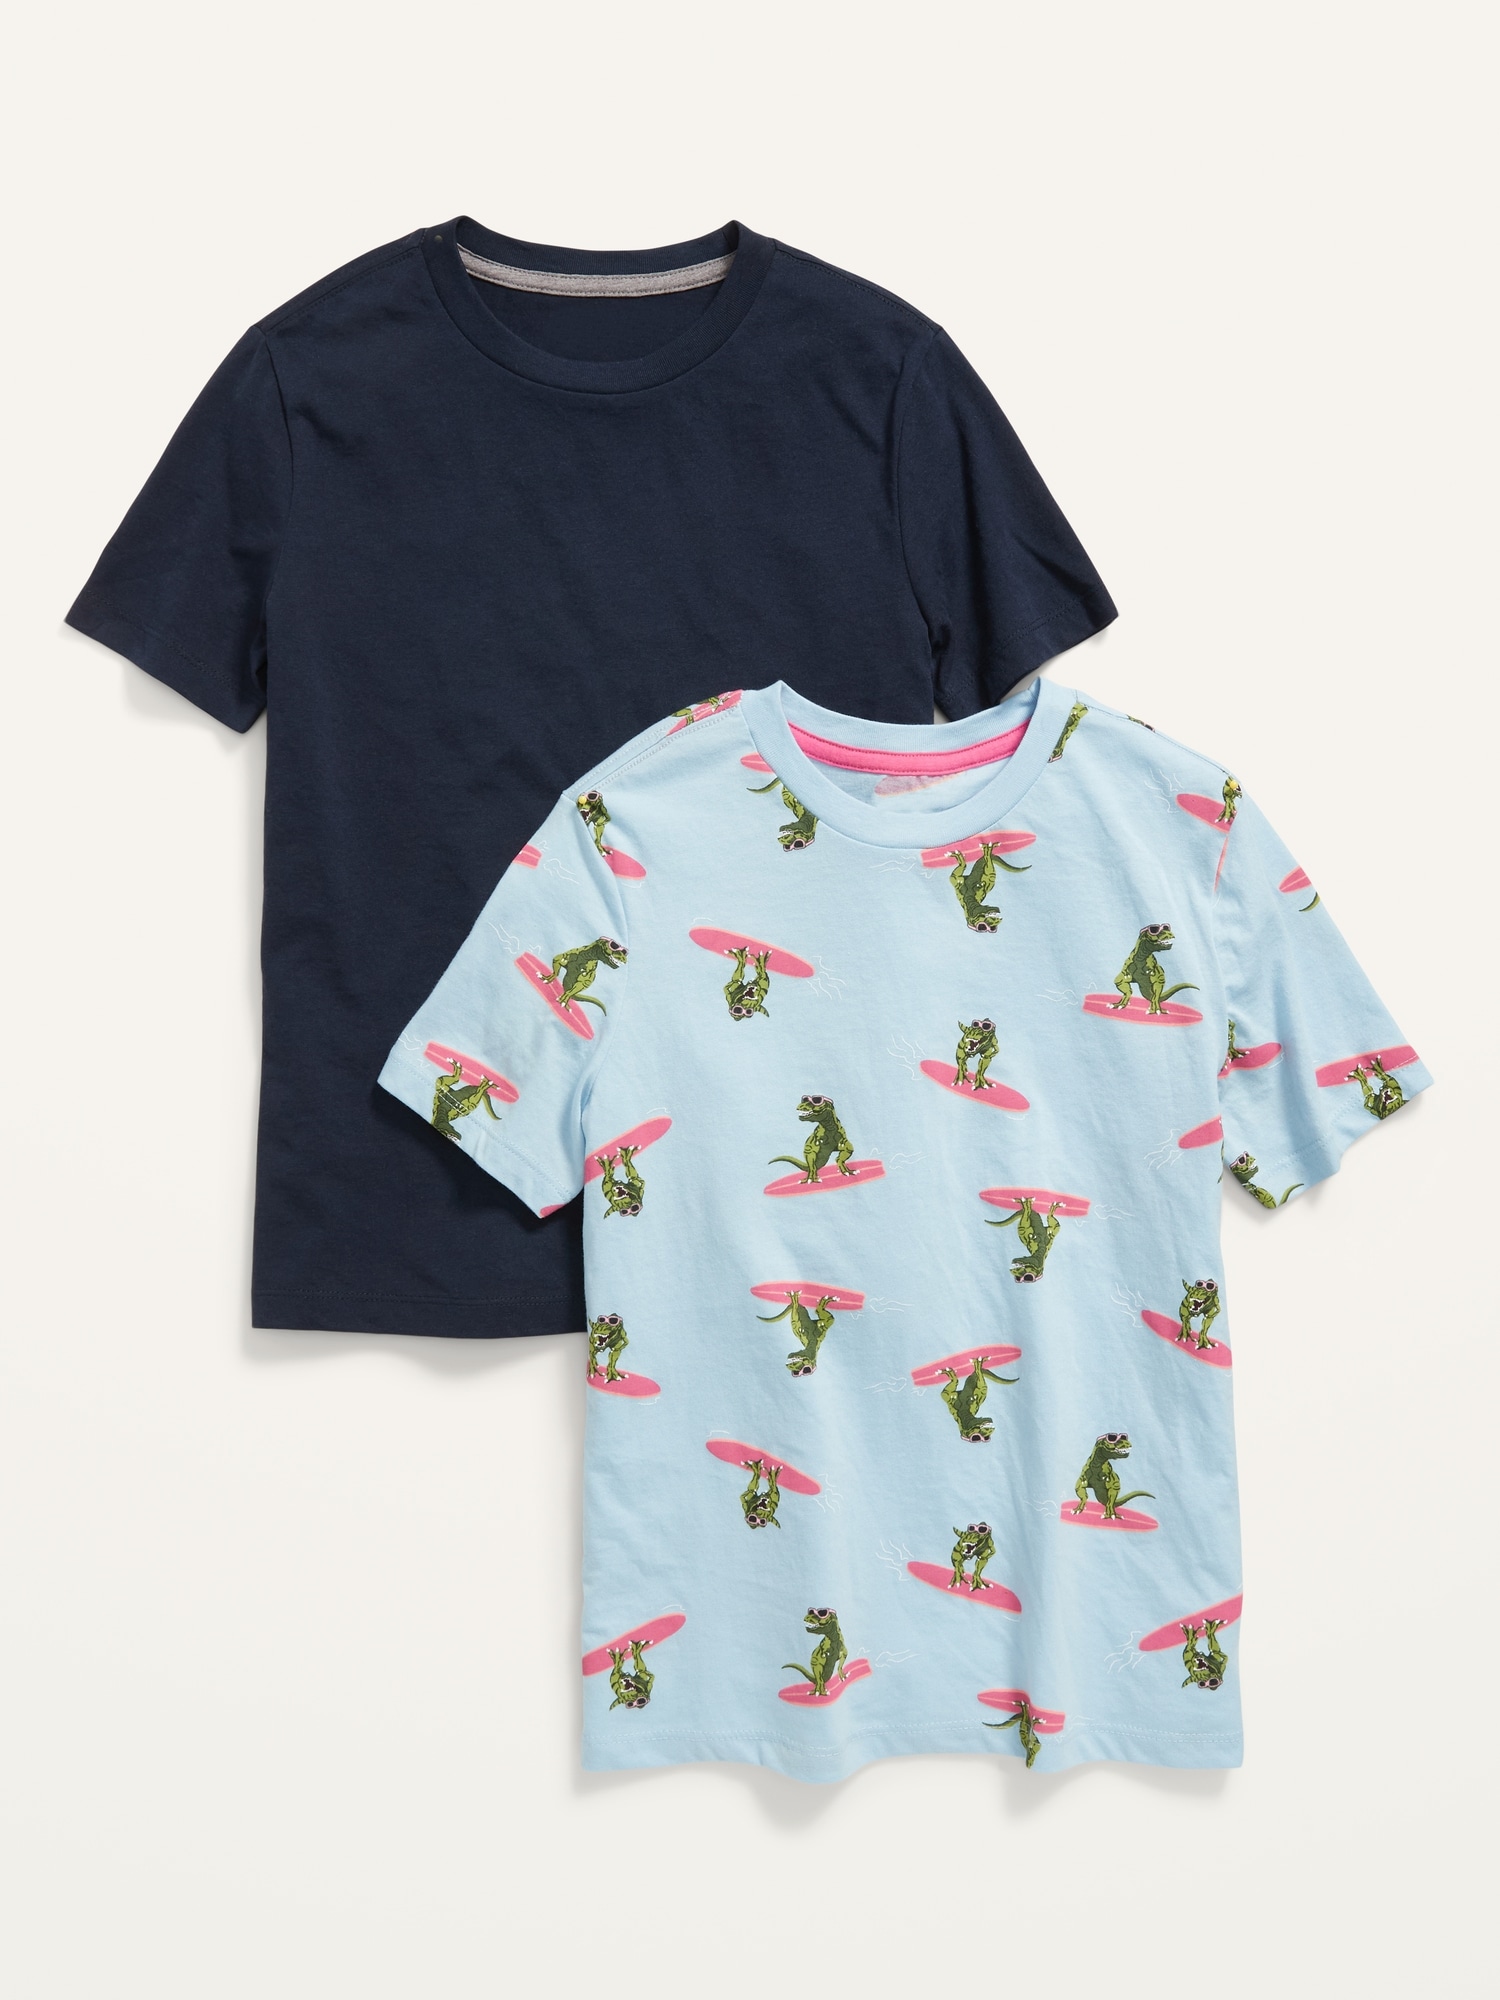 Softest Crew-Neck T-Shirt 2-Pack for Boys | Old Navy